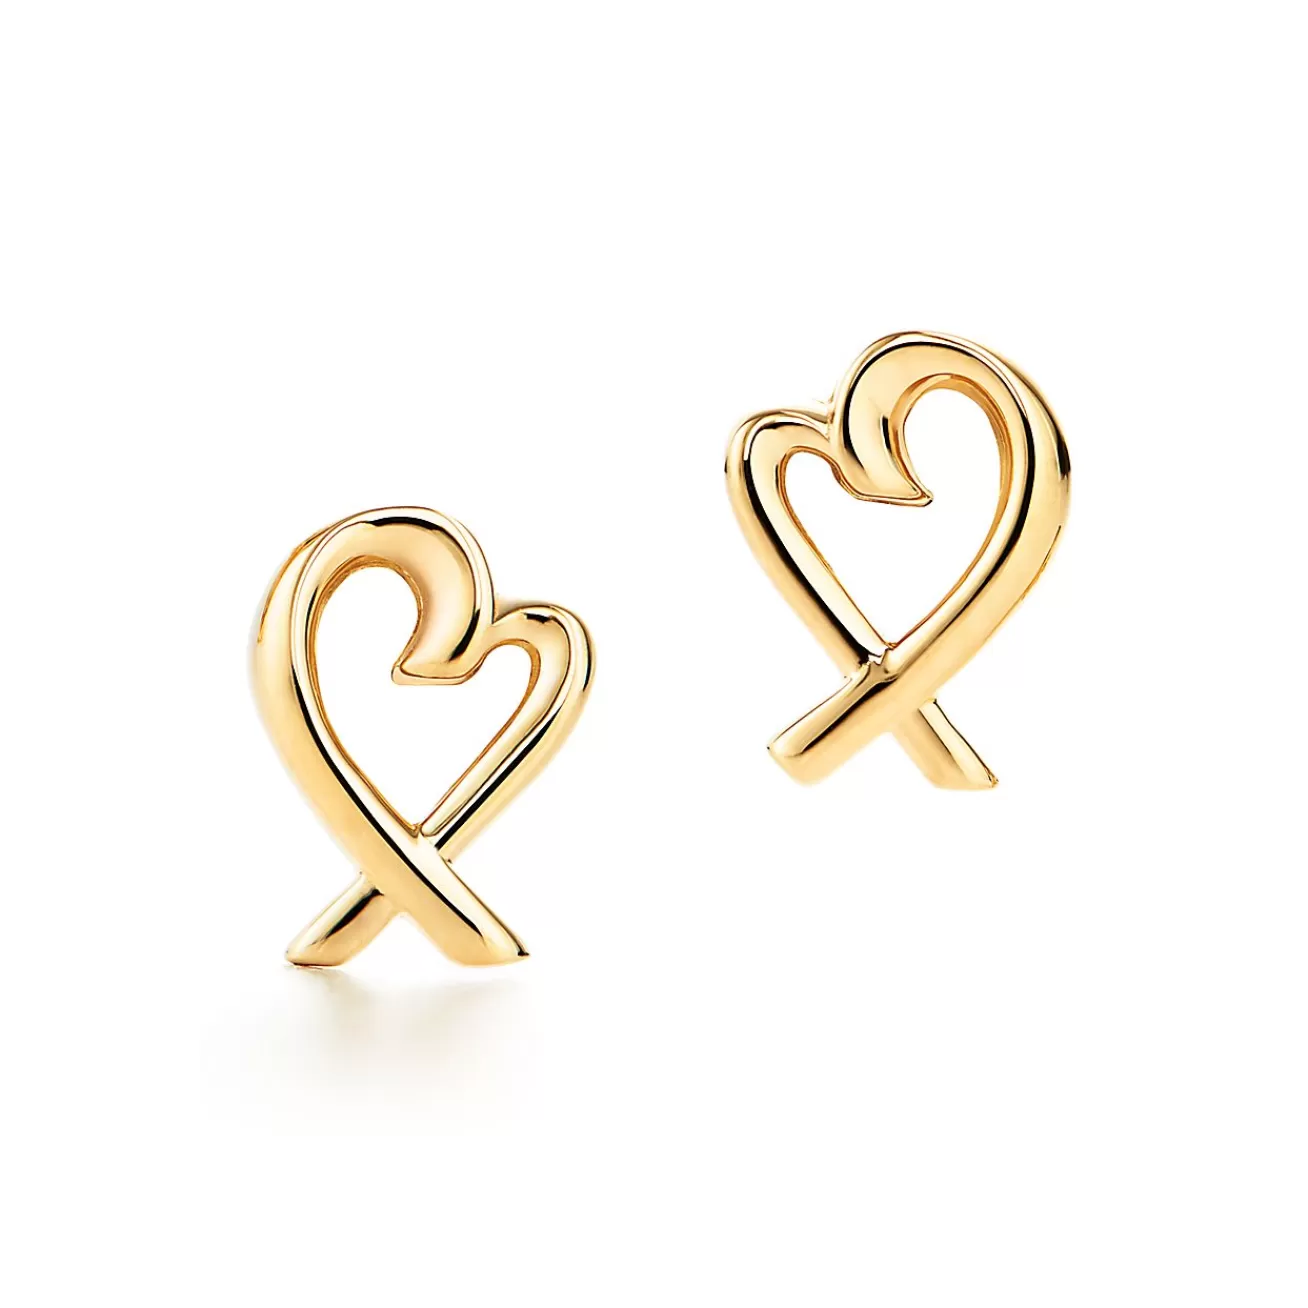 Tiffany & Co. Paloma Picasso® Loving Heart earrings in 18k gold. | ^ Earrings | Gifts for Her